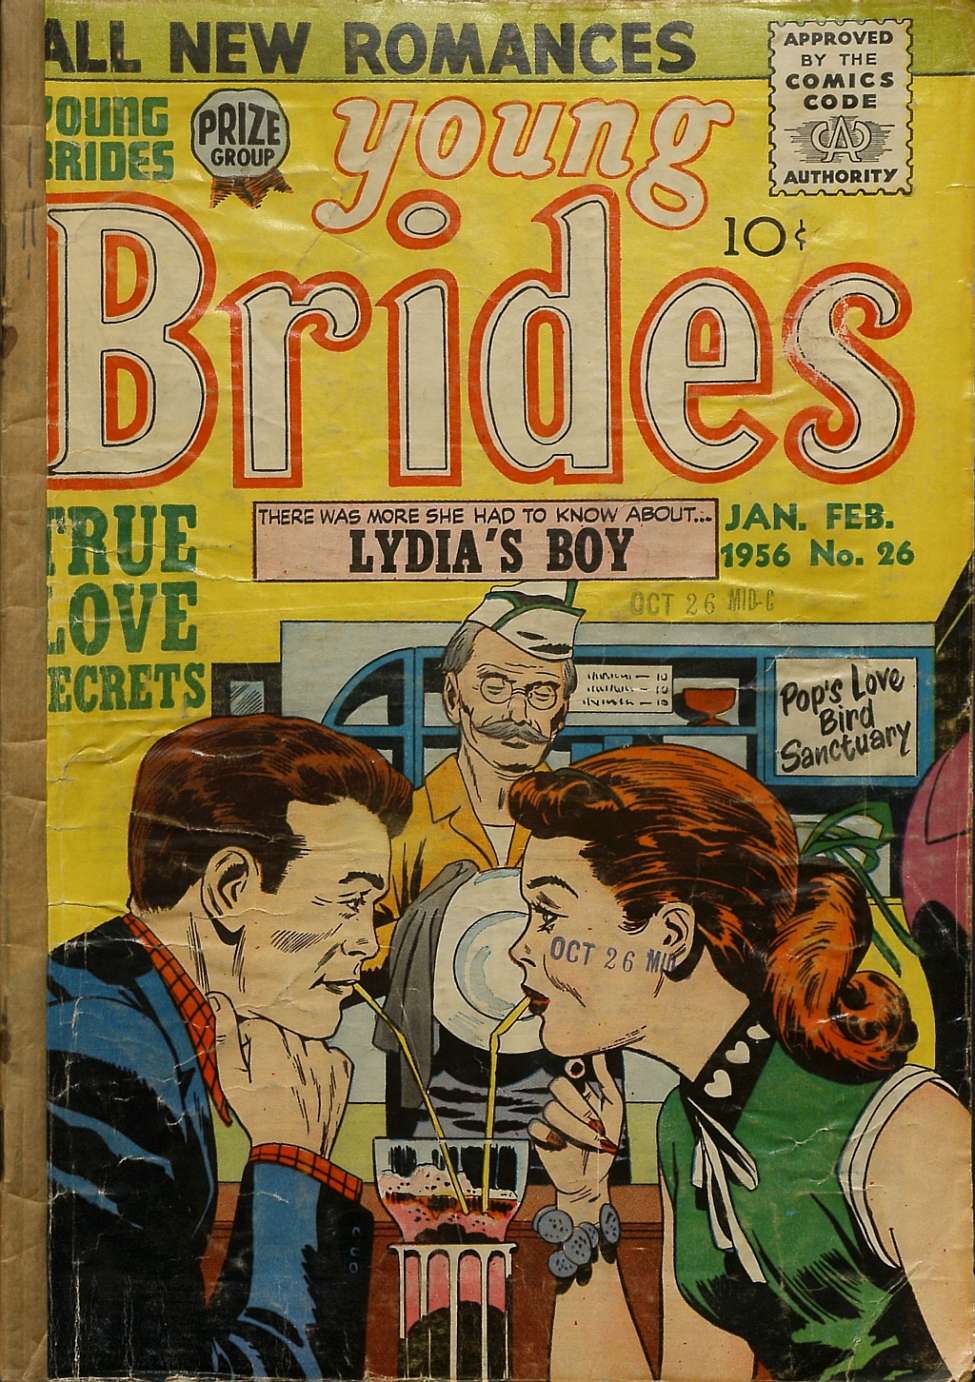 Comic Book Cover For Young Brides 26